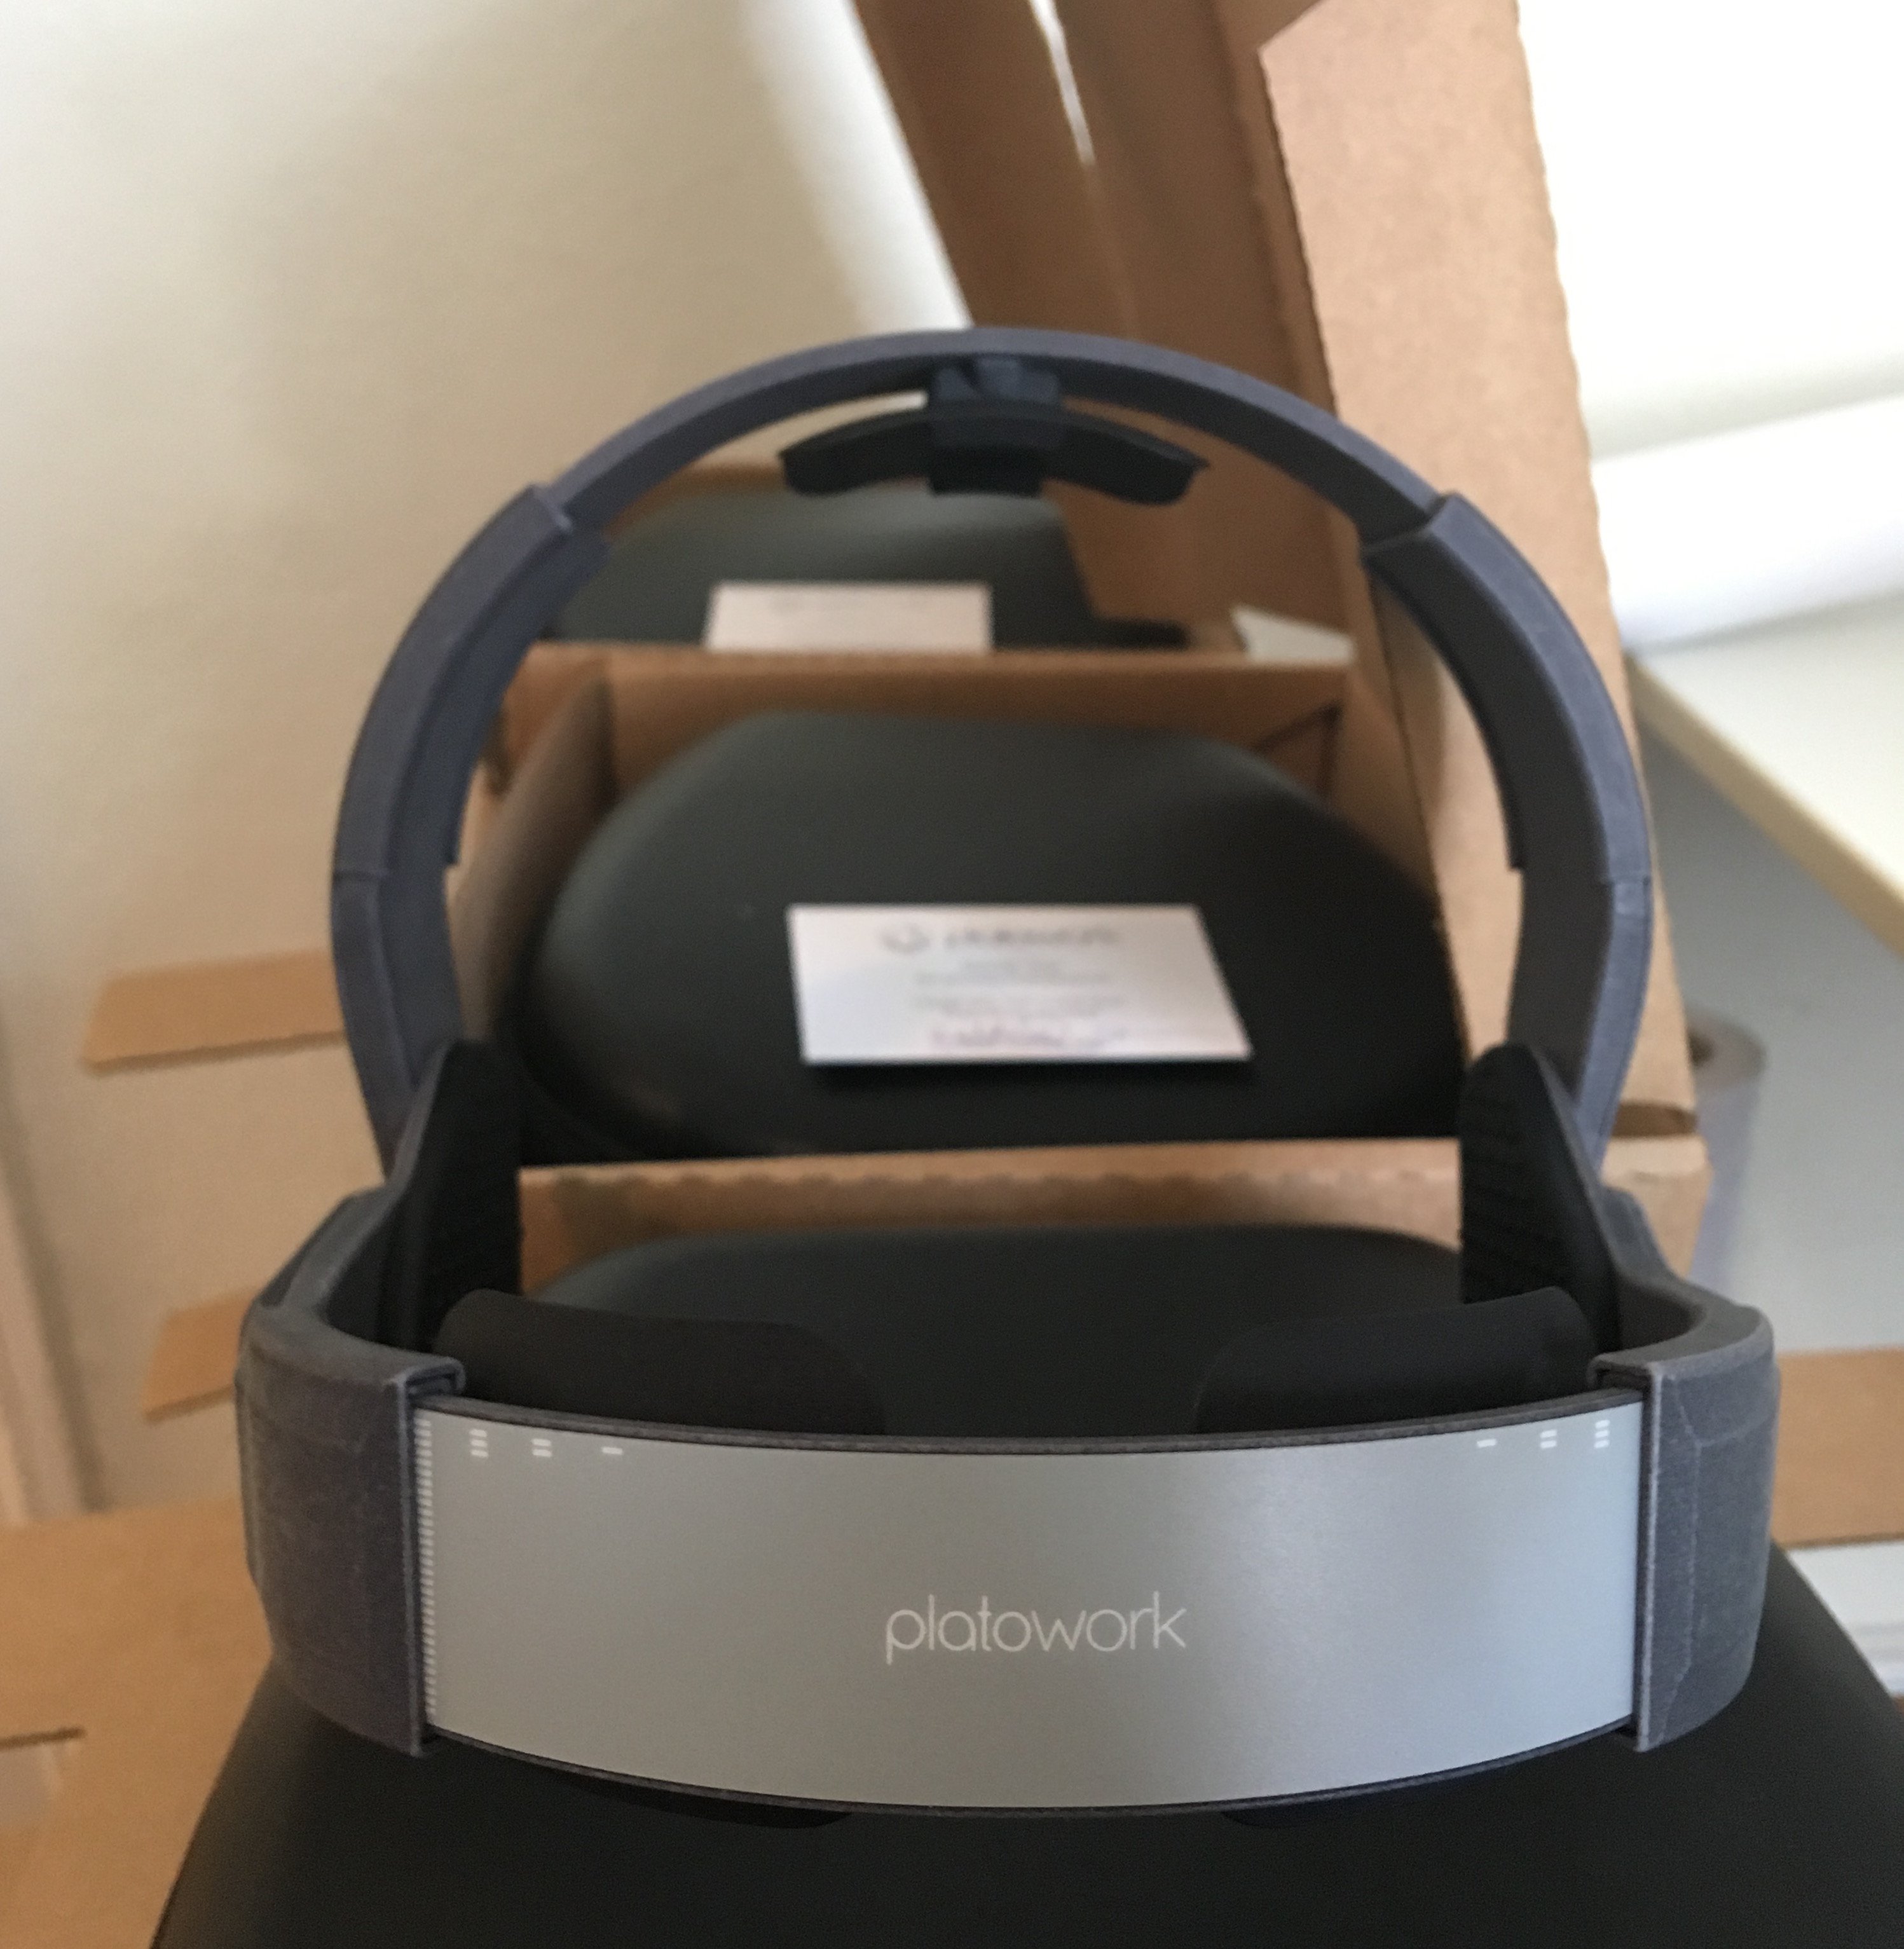 on X: "For the first time in #PlatoScience history we are able to offer next day shipping on our new batch of #PlatoWork headsets! They're selling fast, so get 'em while